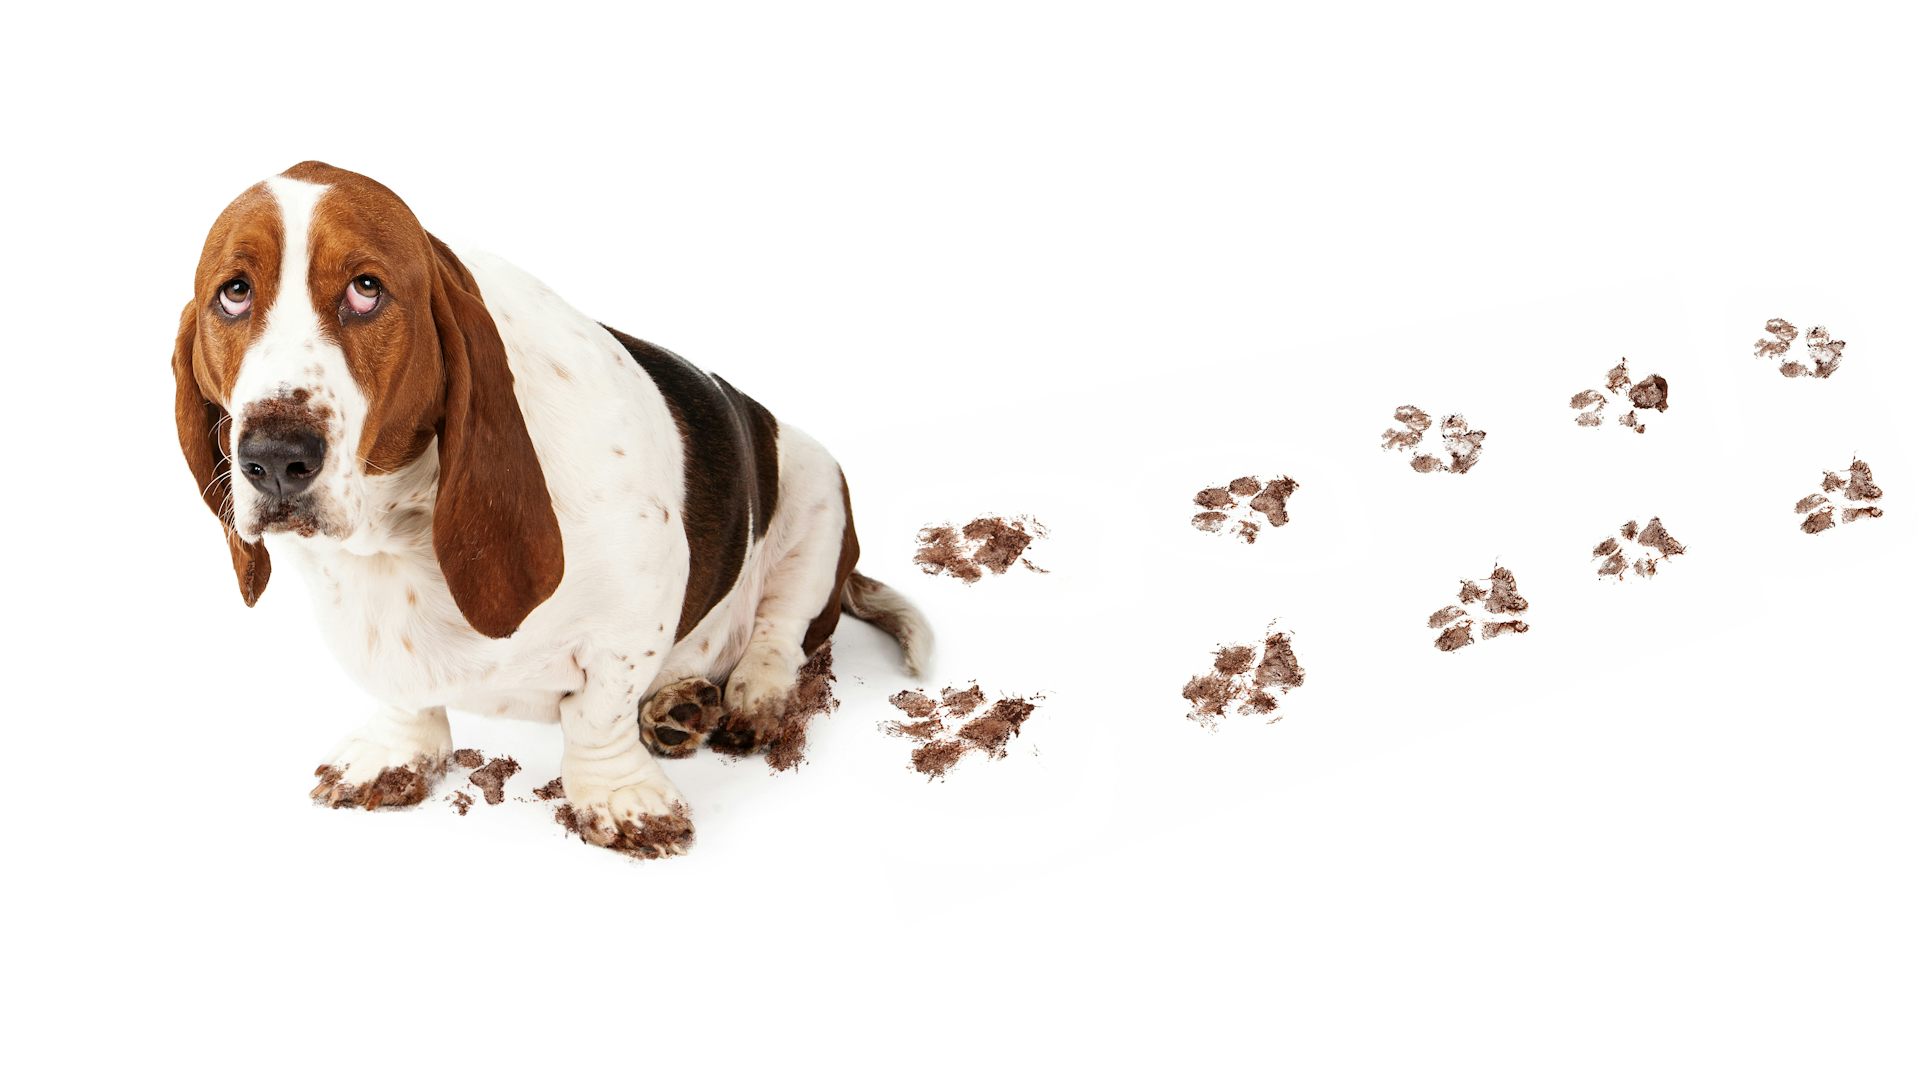 is it bad for dogs to eat their own poop